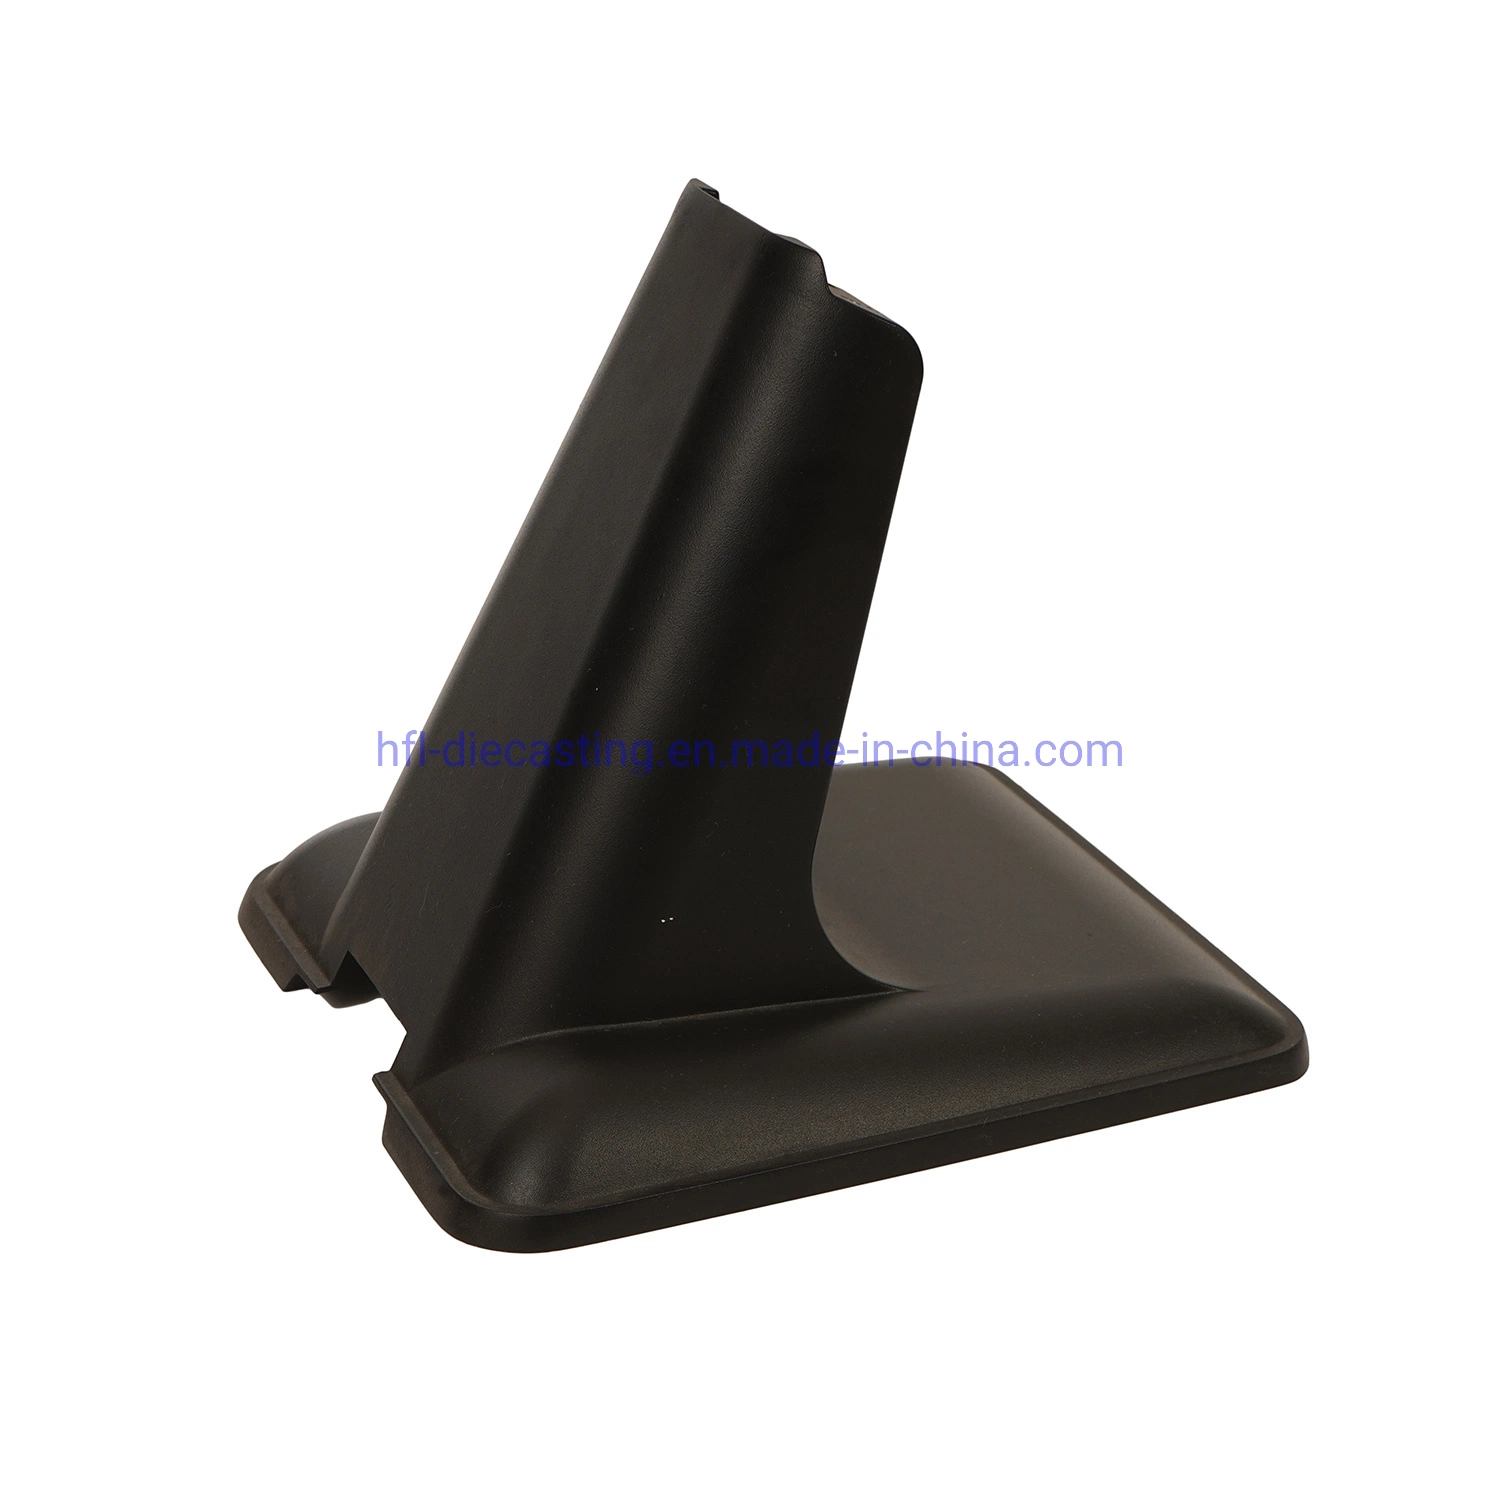 OEM Aluminum & Zinc Alloy Precision Die Casting Parts for Integrated POS Cash Register Computer Bracket Shell Support Electronic Accessories